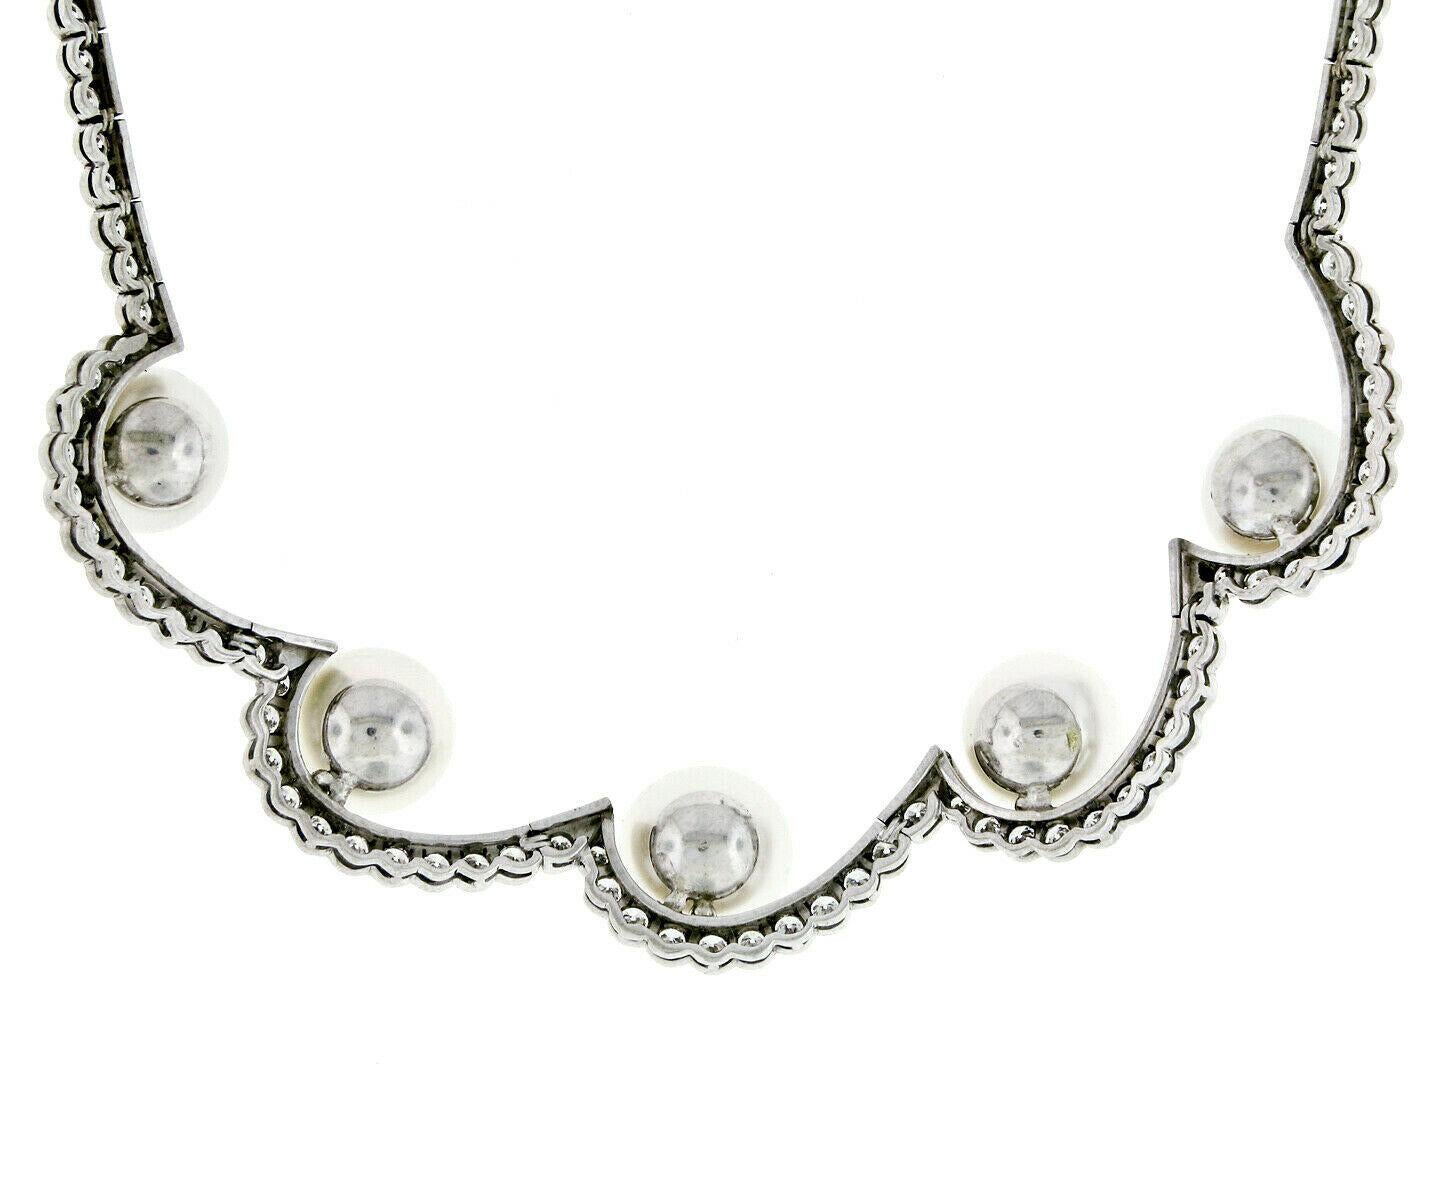 Platinum 10.25 Carat Diamond and Floating South Sea Pearl Statement Necklace For Sale 1